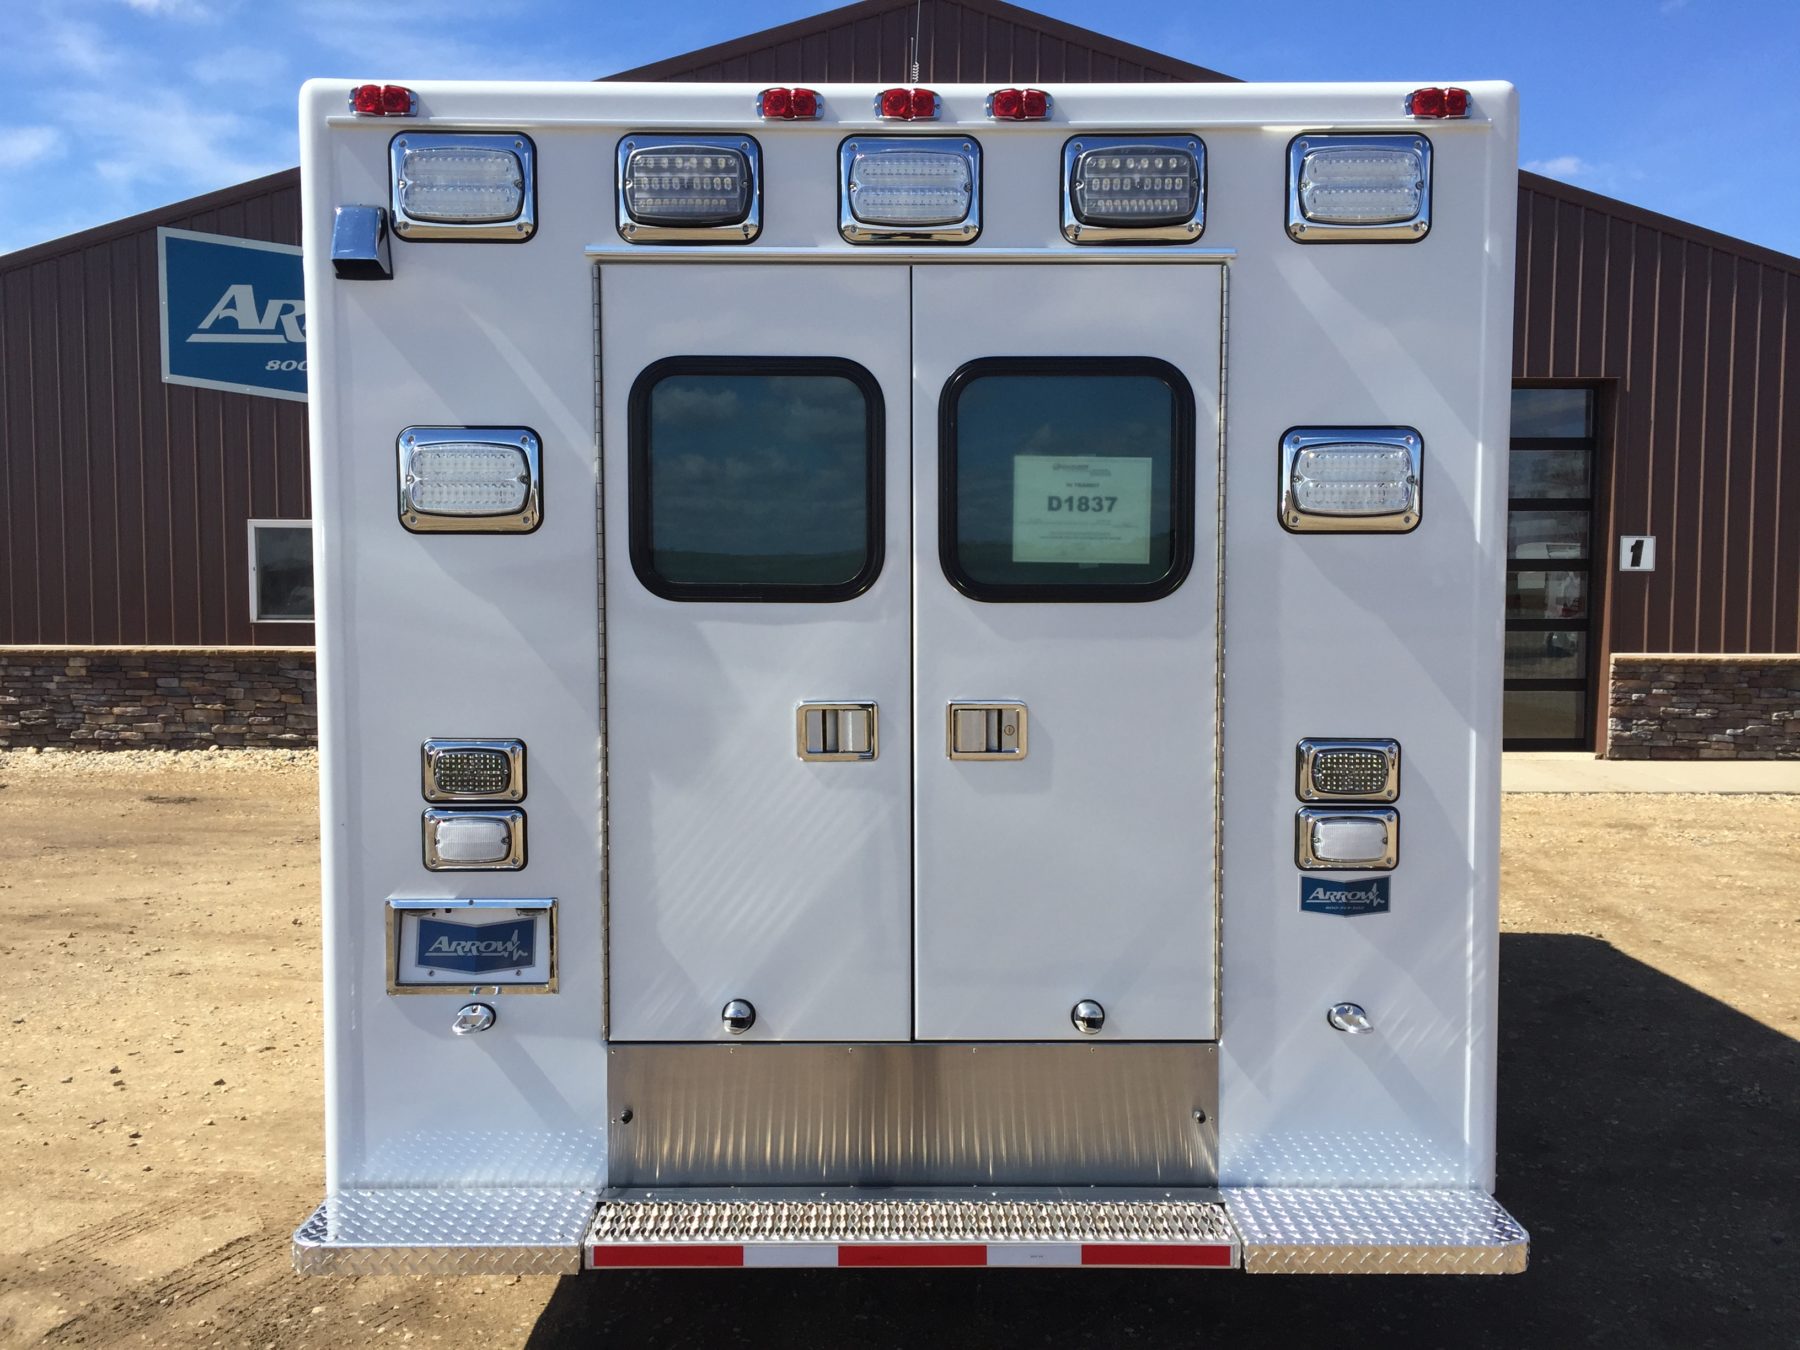 2017 Chevrolet K3500 4x4 Type 1 Ambulance For Sale – Picture 13